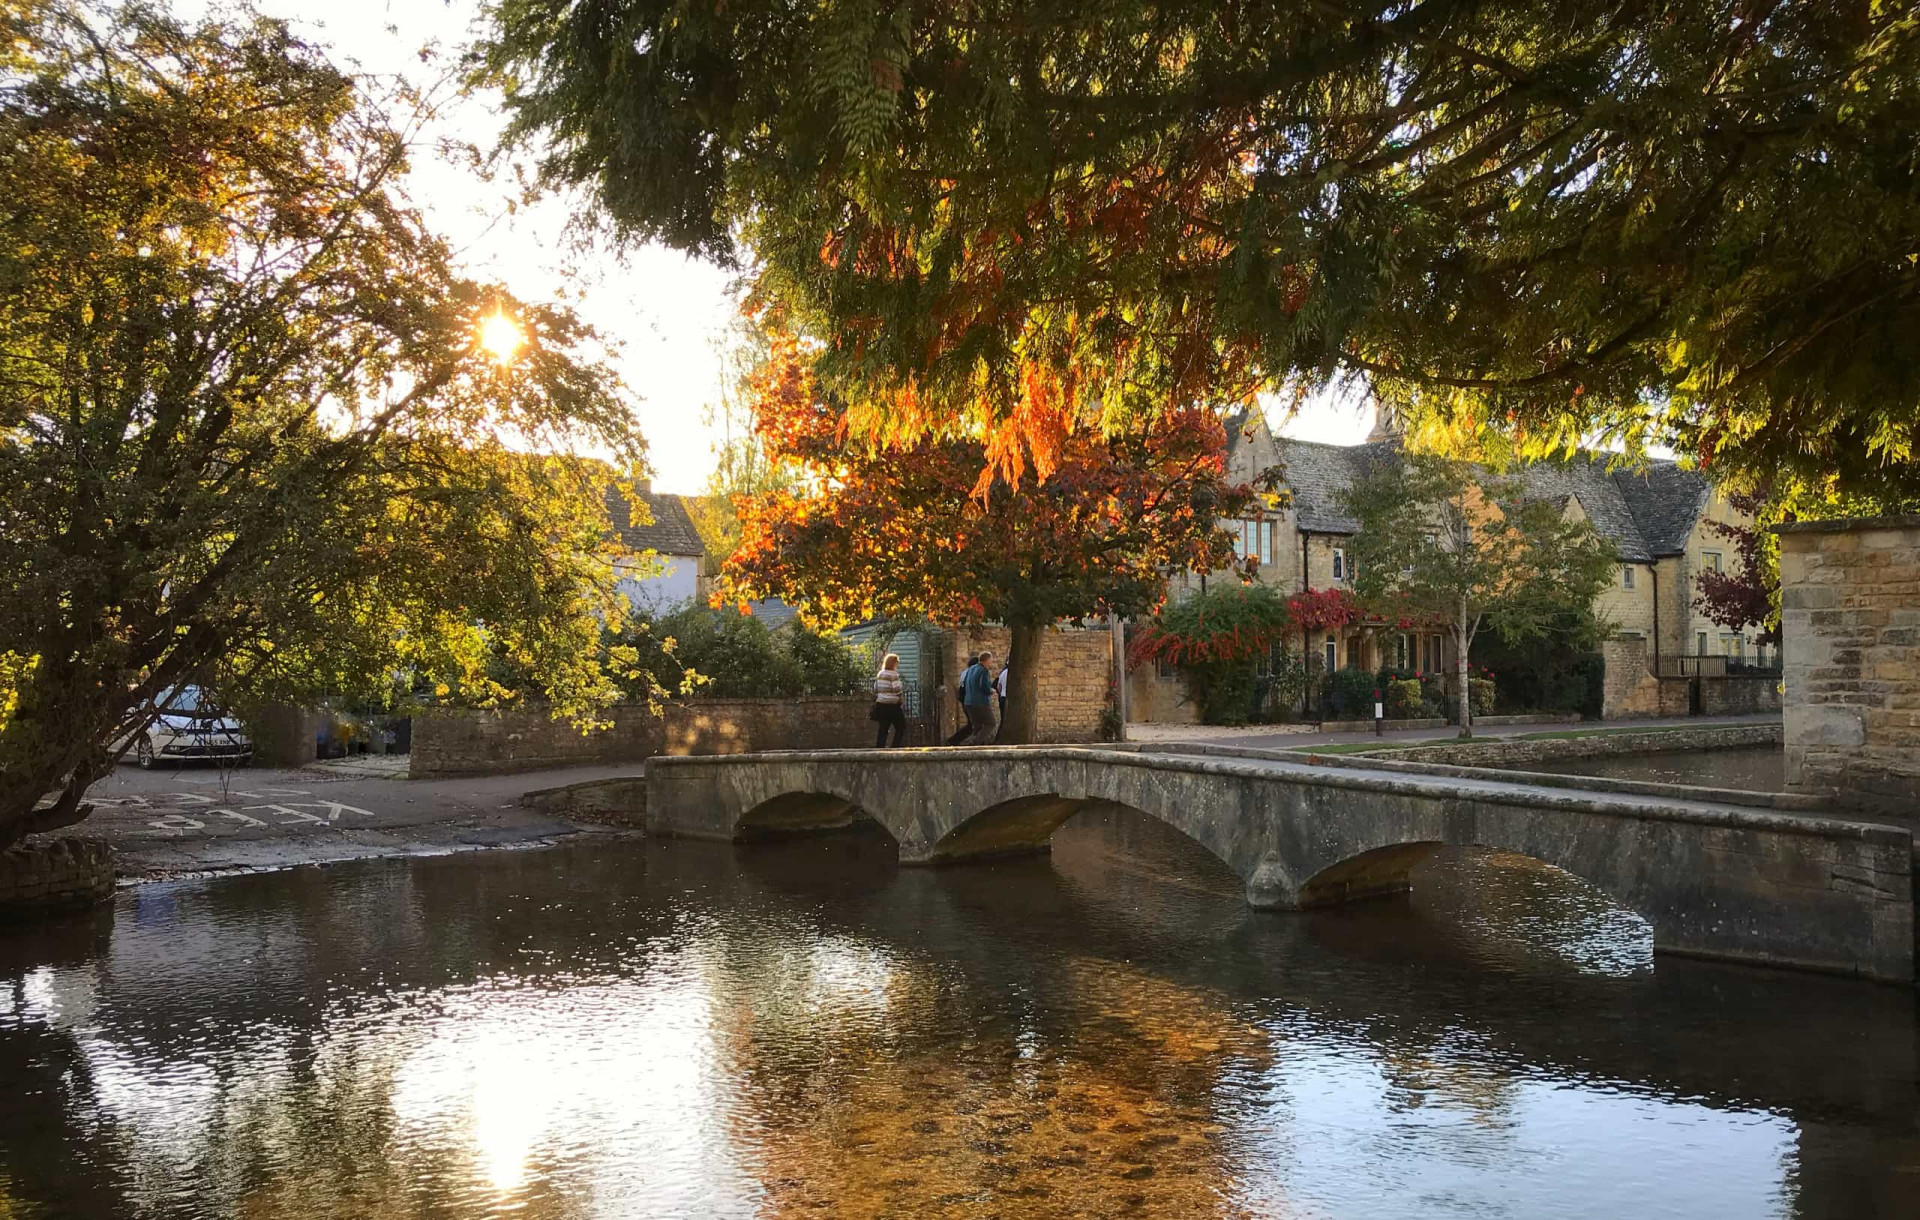 <p>This Gloucestershire town is as quaint as it gets. It is built around the River Windrush and is even called the "Venice of the Costwolds." You can visit the amazing Motoring Museum as well as navigating the Dragonfly Maze.</p><p>You may also like:<a href="https://www.starsinsider.com/n/236449?utm_source=msn.com&utm_medium=display&utm_campaign=referral_description&utm_content=471299v4en-en"> Did you know that many of your favorite characters are played by LGBT actors?</a></p>